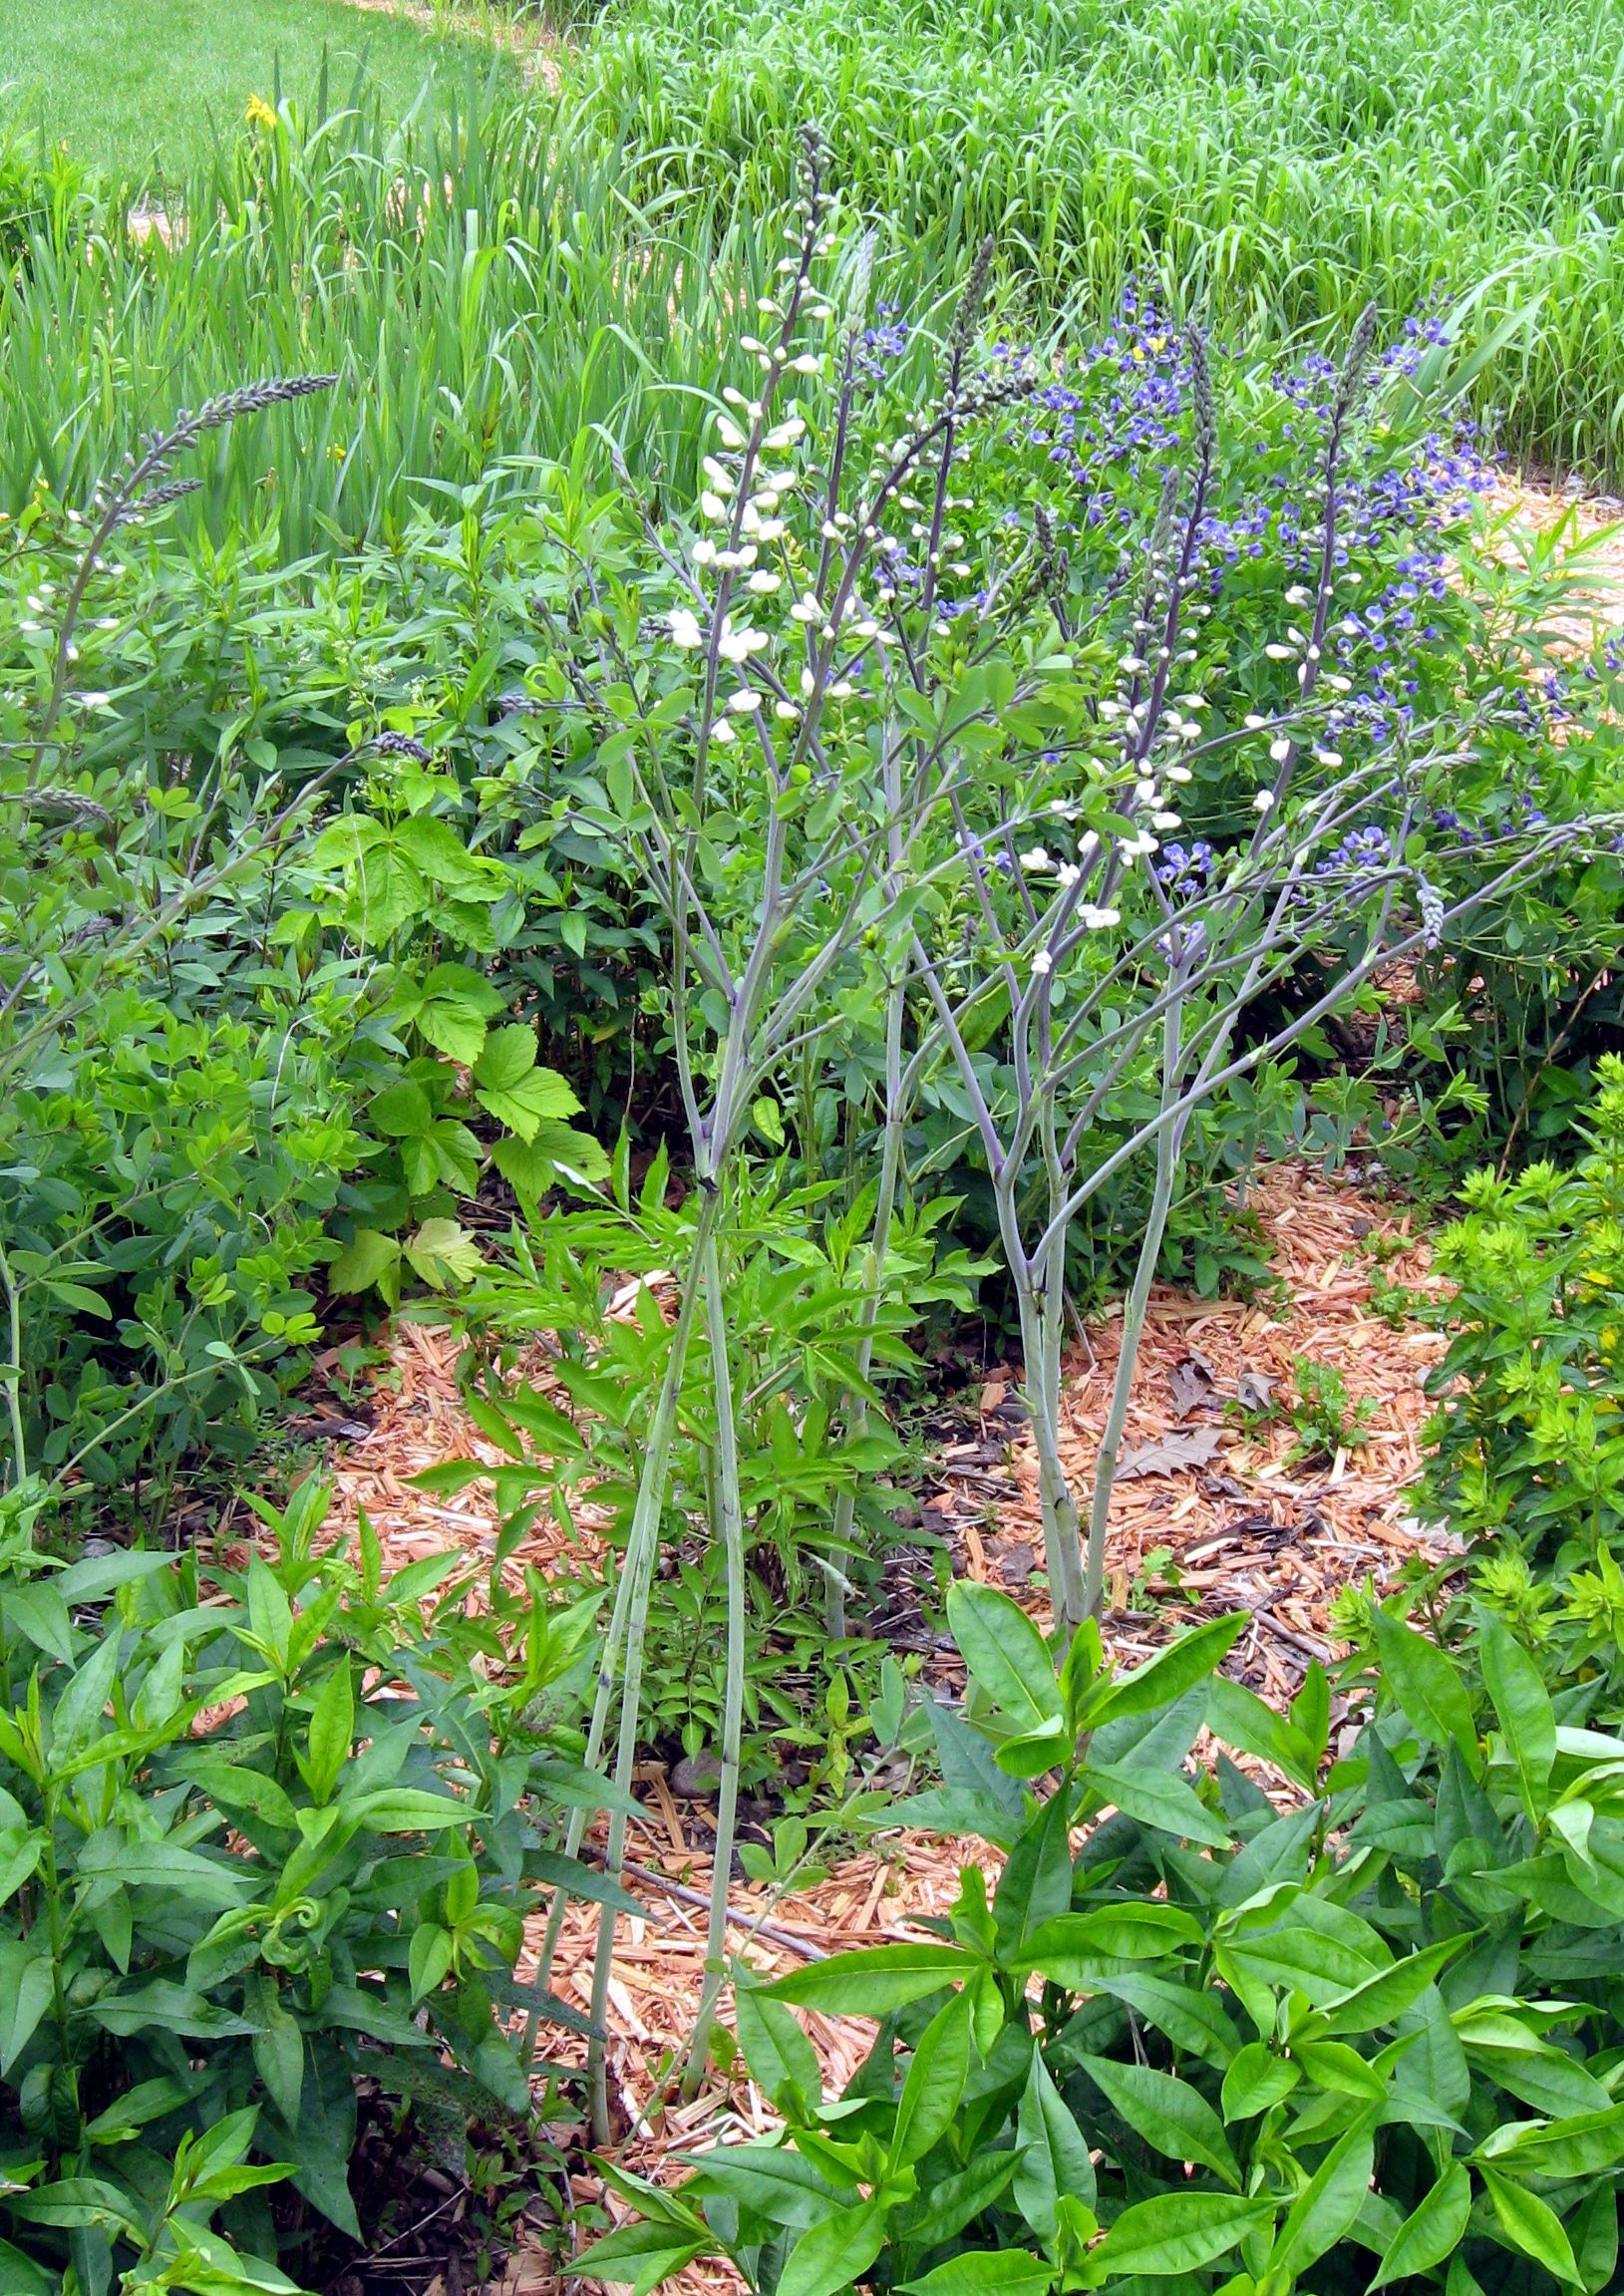 A small group of plants with long stems and white flowers.